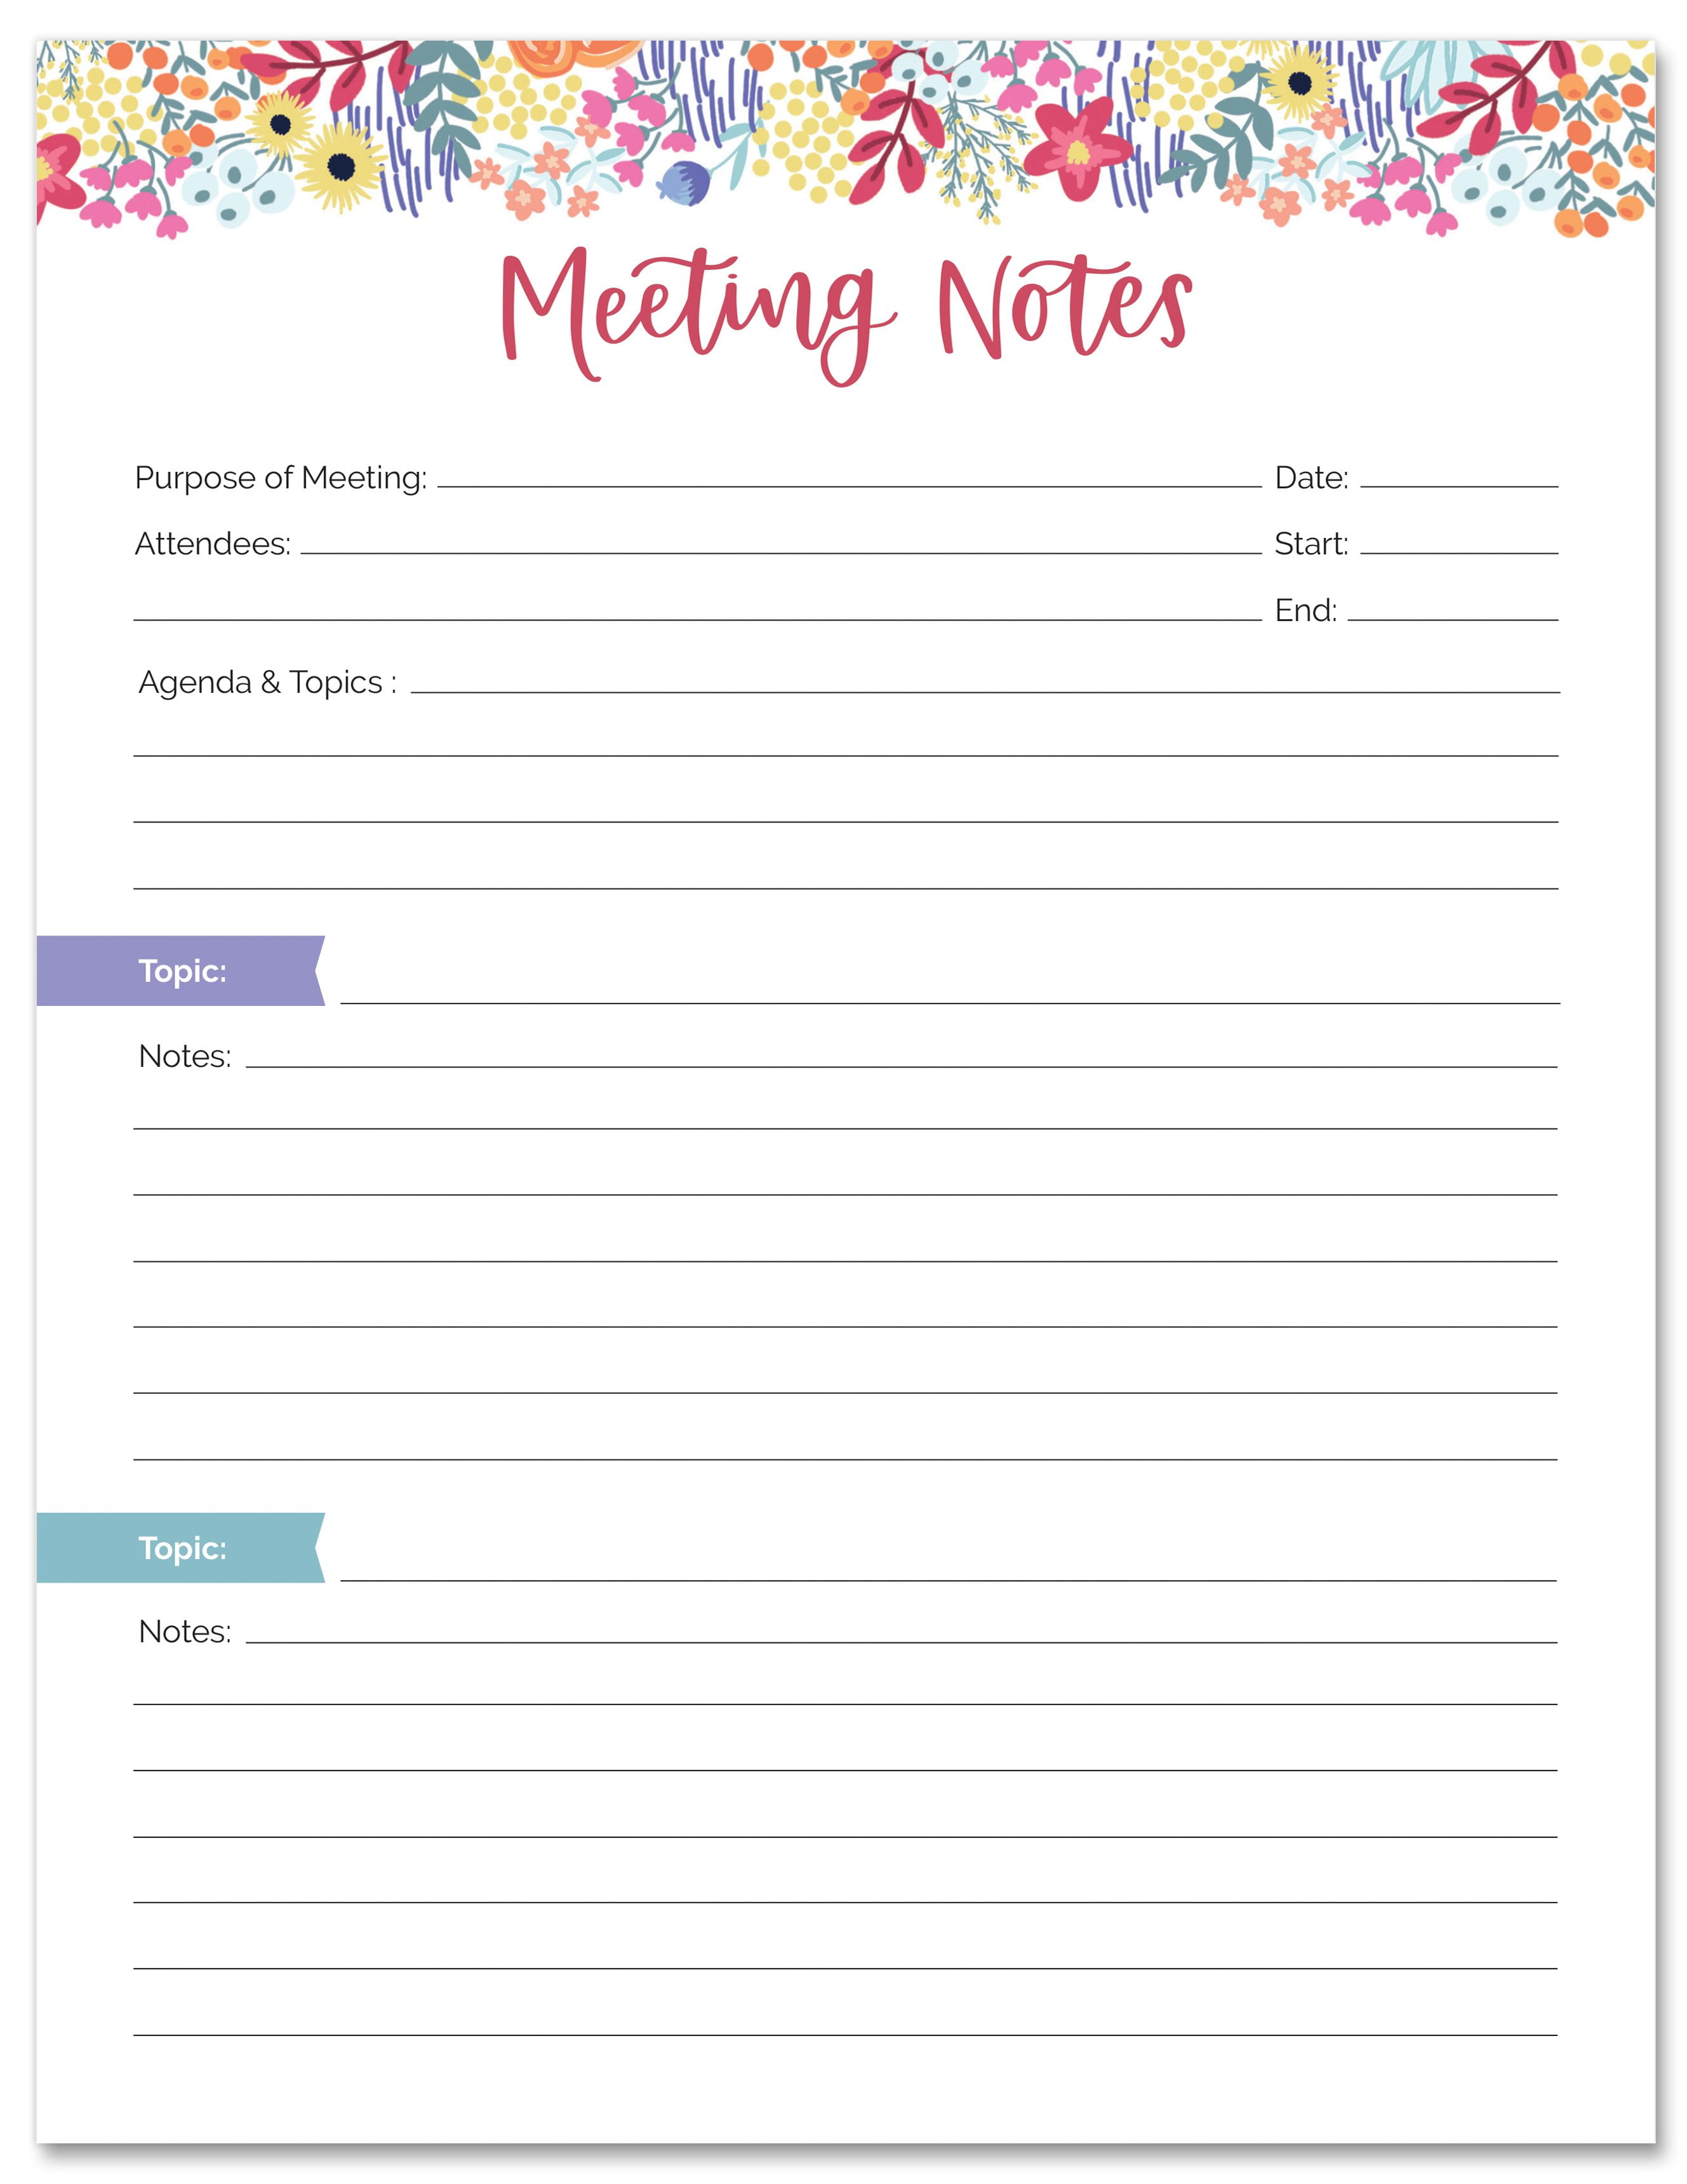 MEETING NOTES PLANNING PAD, 23.23" X 23" - bloom In Template For Meeting Notes